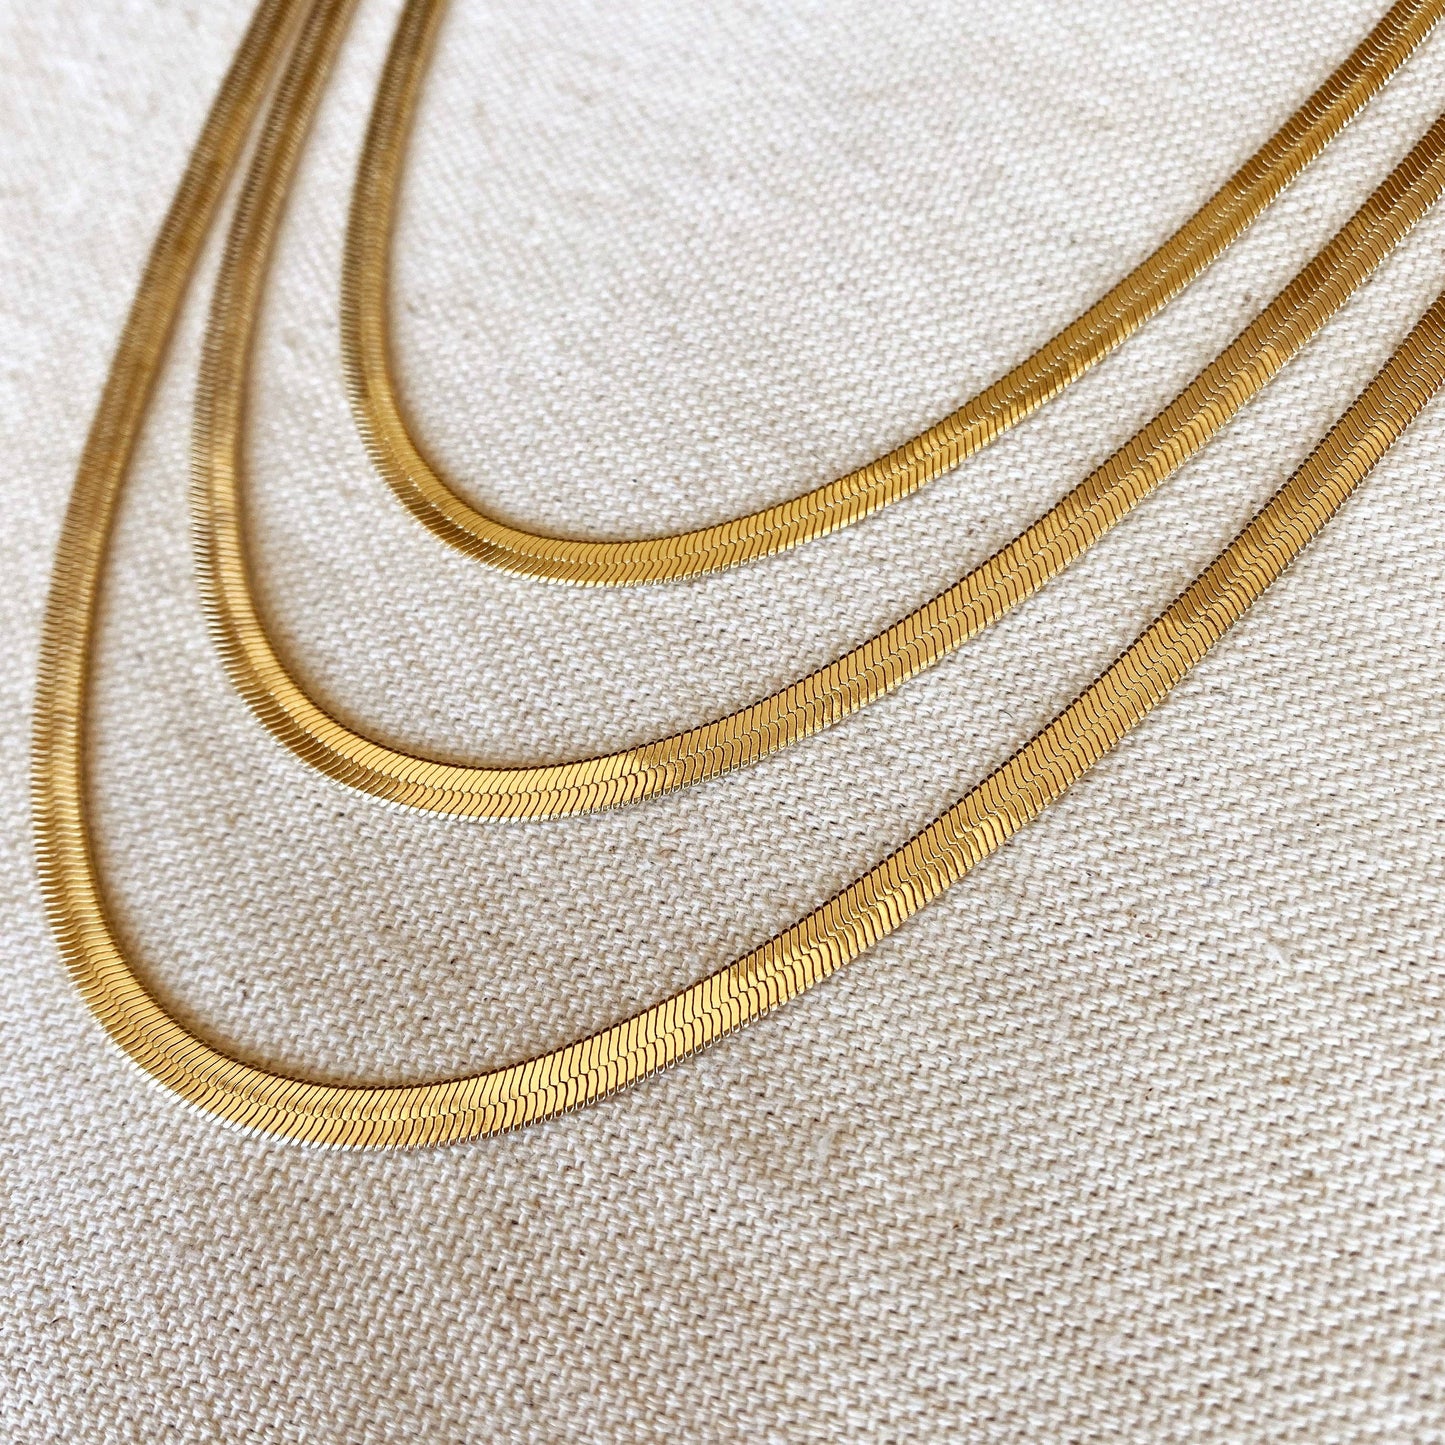 18k Gold Filled 4.0mm Thickness Herringbone Chain Necklace : 18 inches